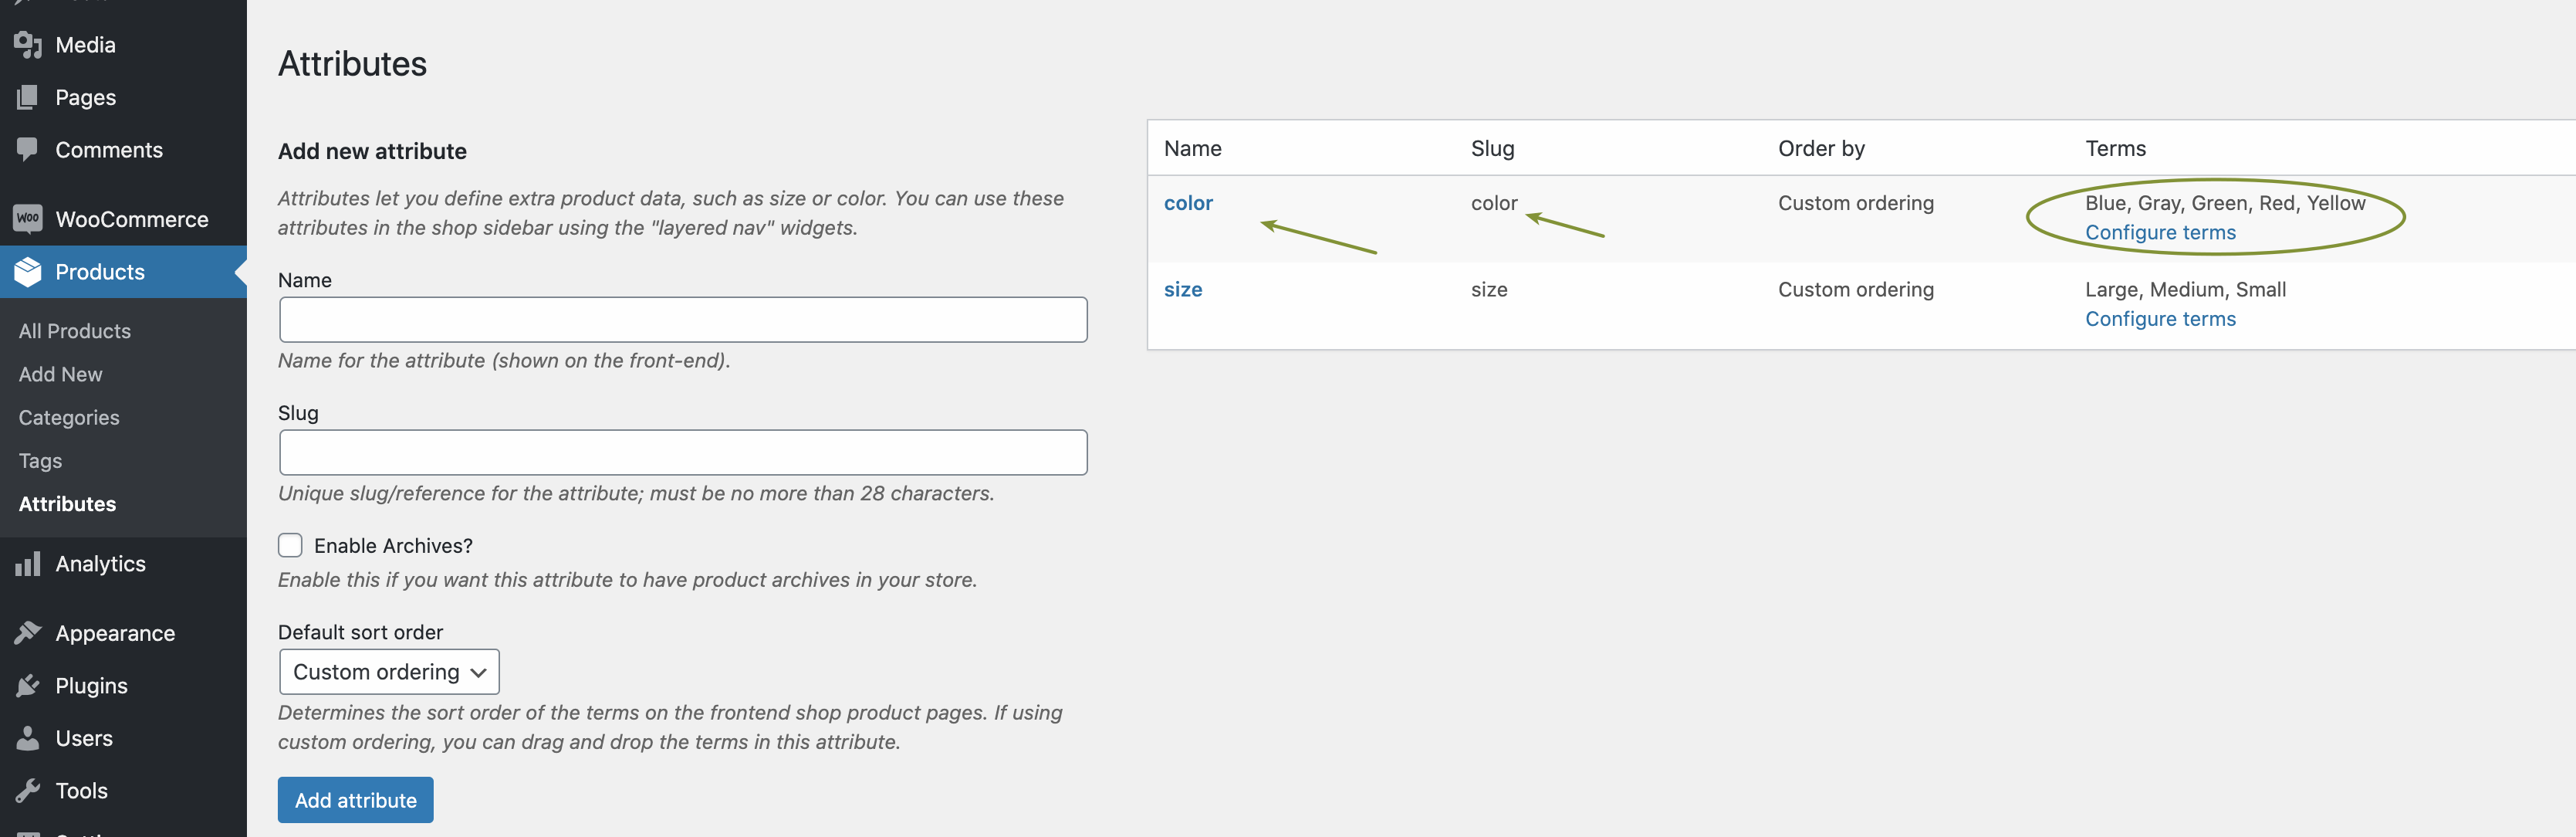 select add new attribute in attributes section